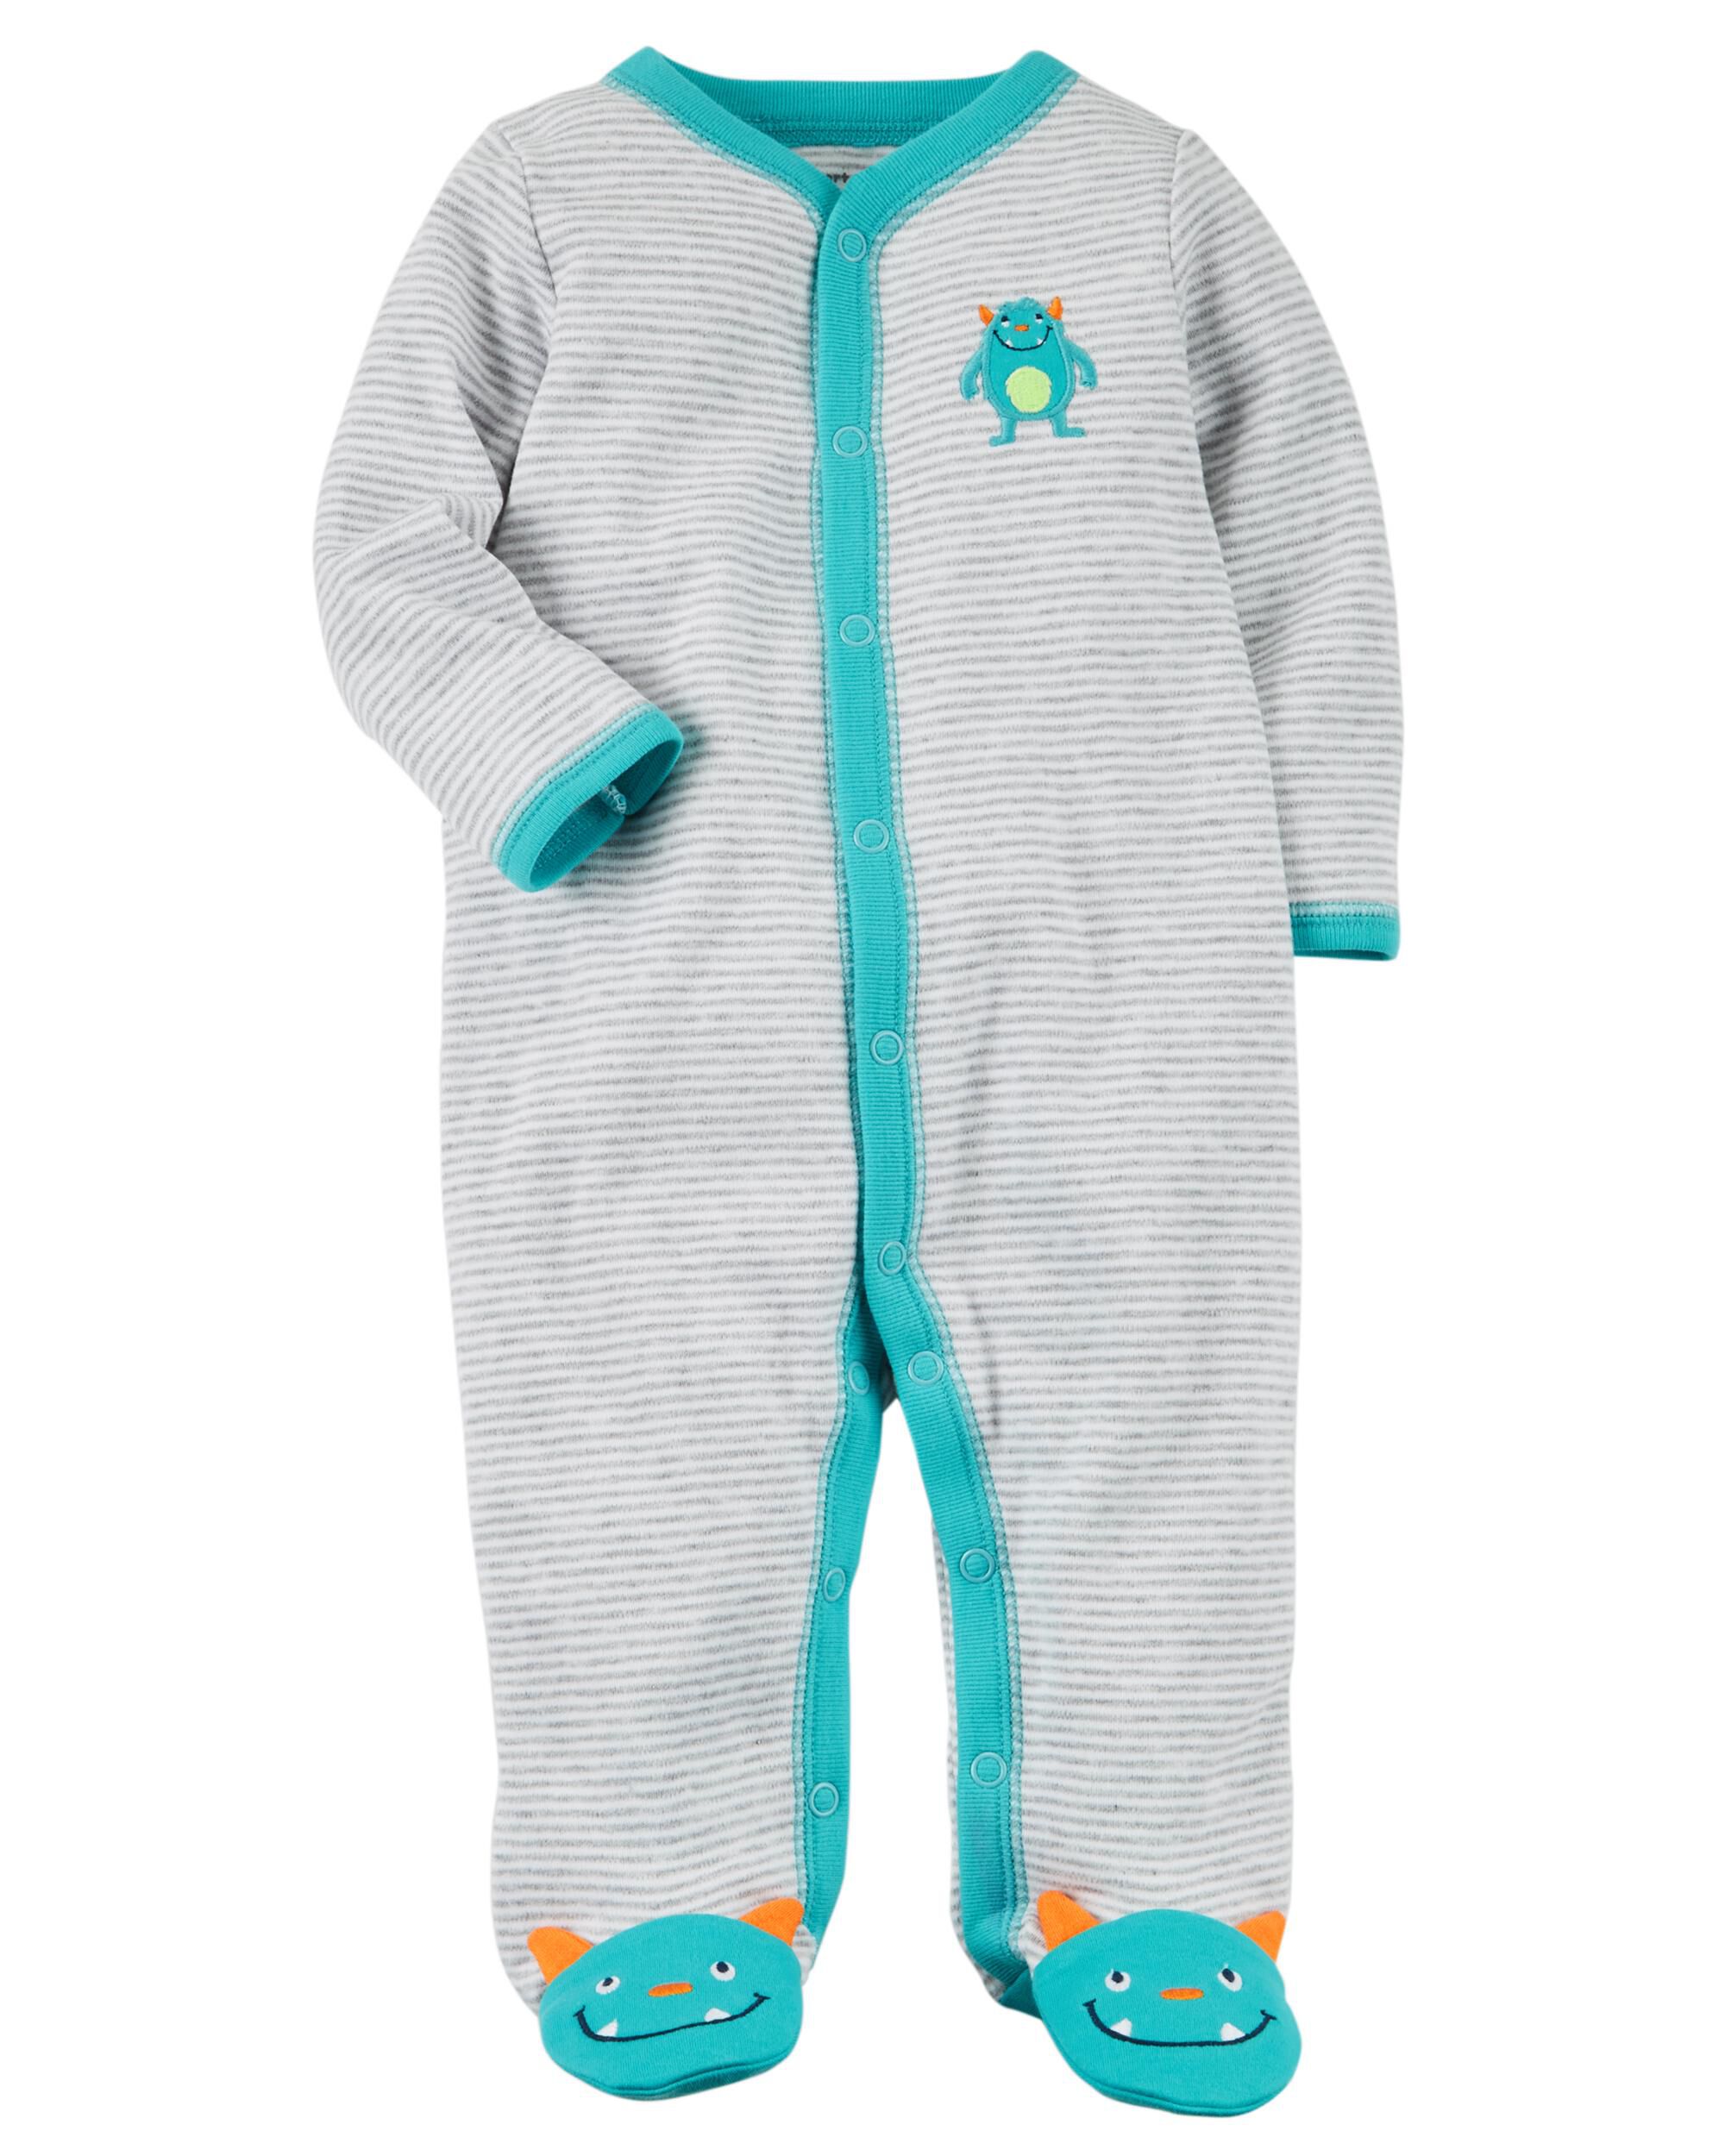 Snap-Up Monster Cotton Sleep & Play